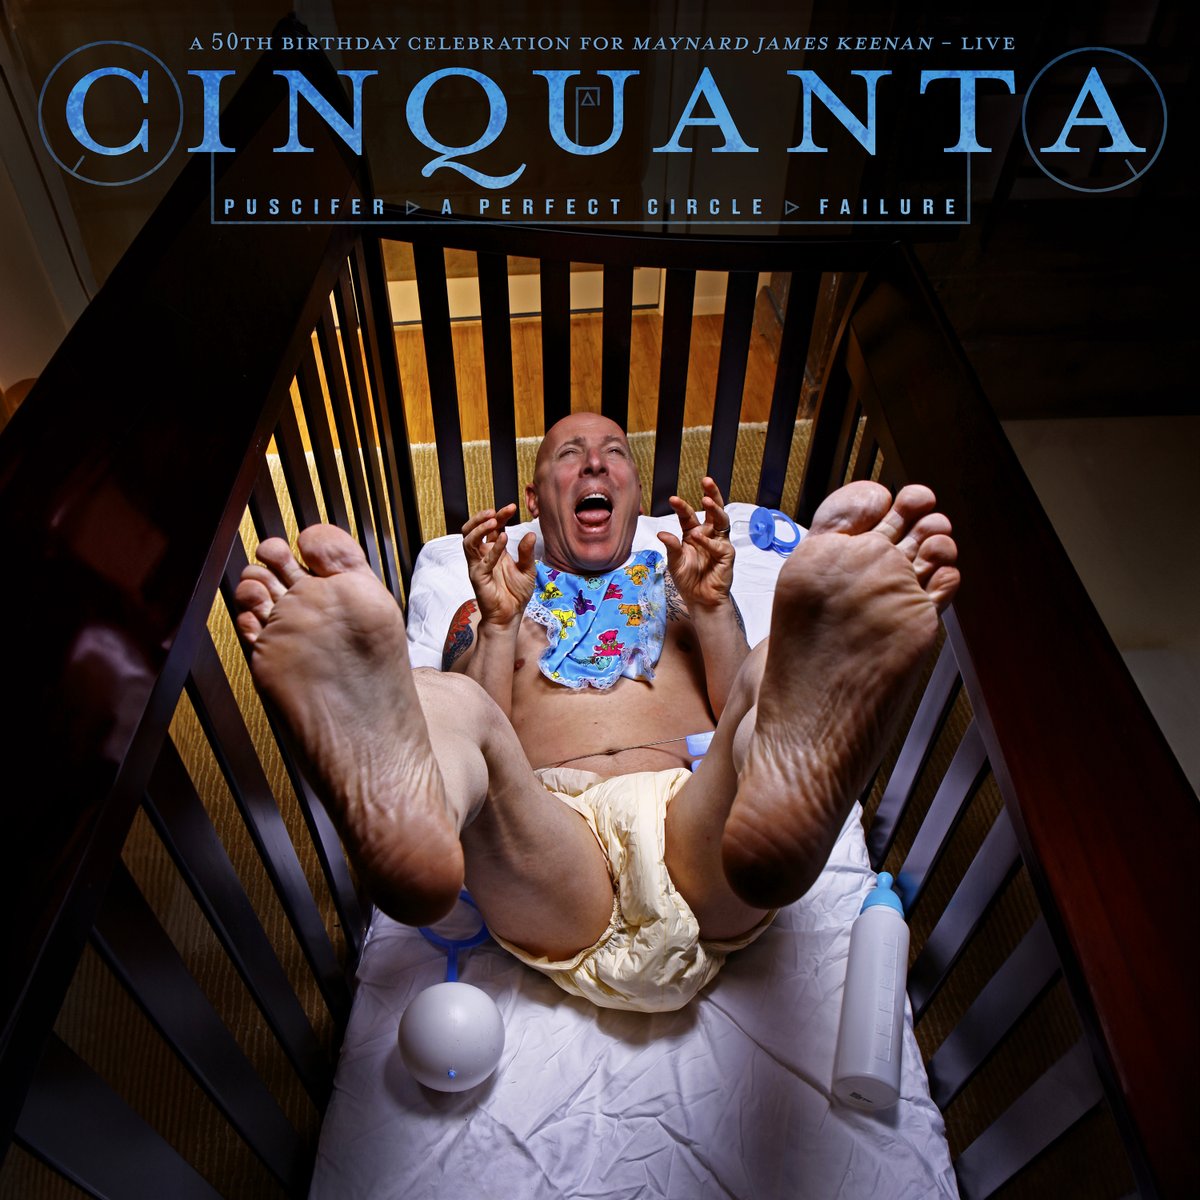 Cinquanta is out on vinyl now, featuring Puscifer, @aperfectcircle & @Failure, get it now via Puscifer.com, @Revolvermag & indie record stores